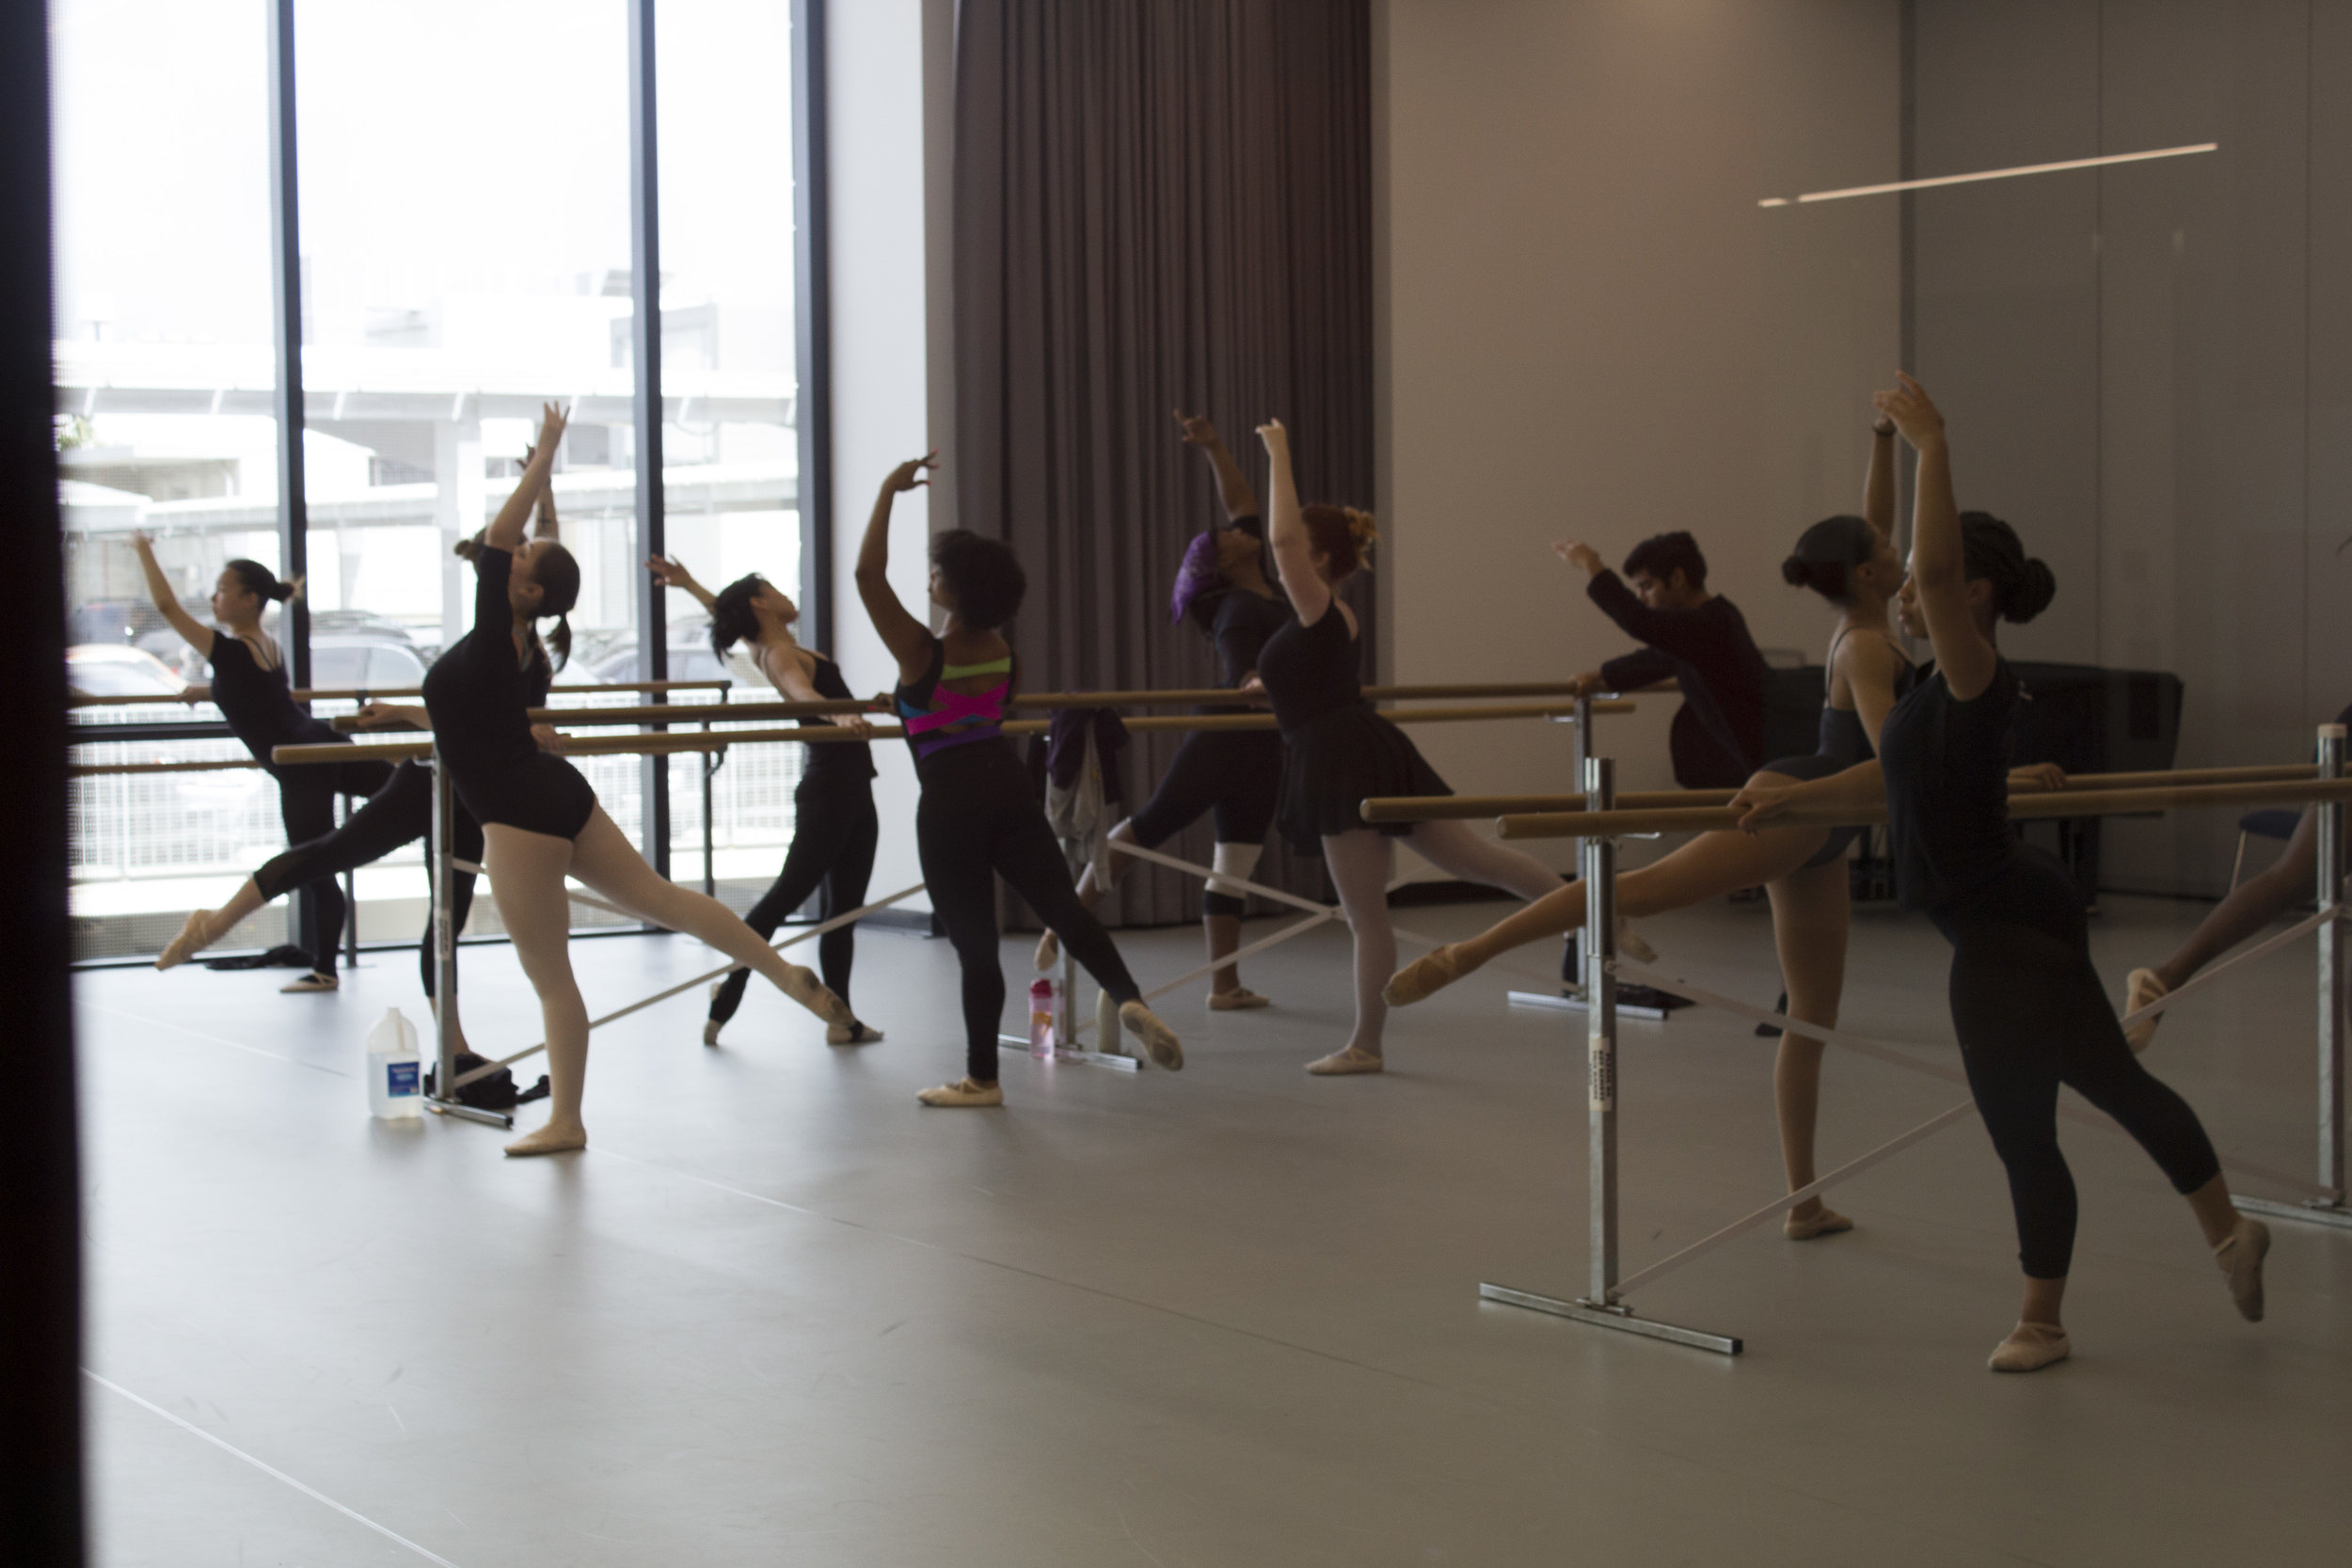  Dance class on the 3rd floor of the all new Core Performance Center building. At Santa Monica College, Calif. Photo taken on April 3, 2017. Emeline Moquillon, staff photographer 